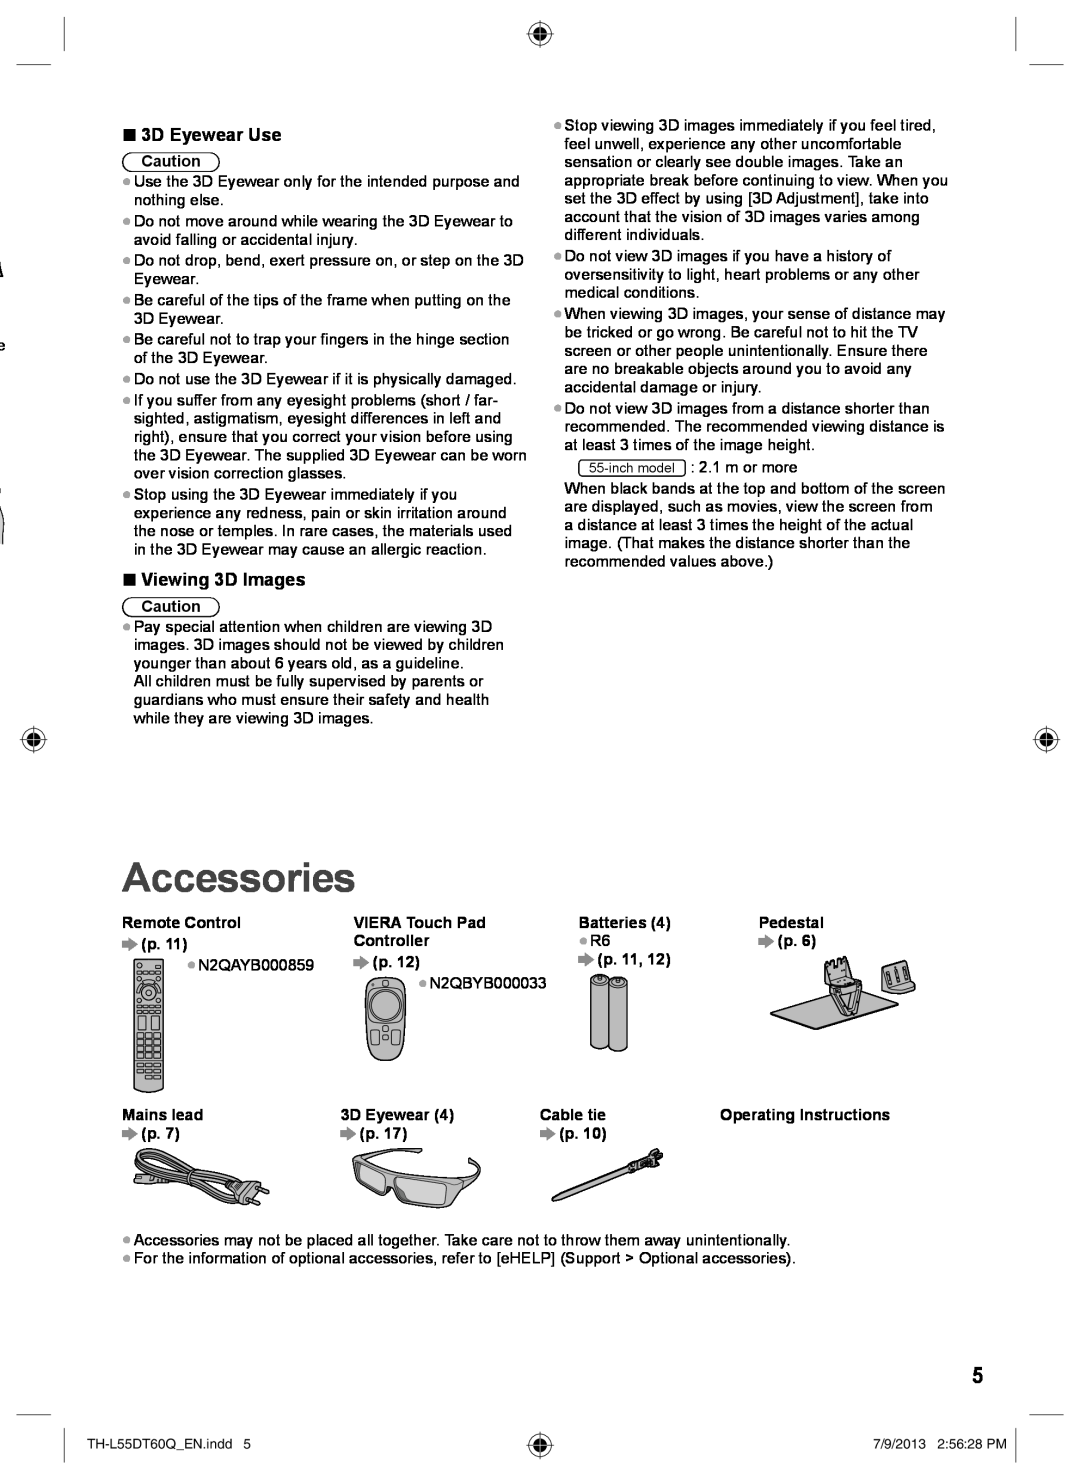 Panasonic TH-L55DT60Q operating instructions Accessories, 3D Eyewear Use, Viewing 3D Images 